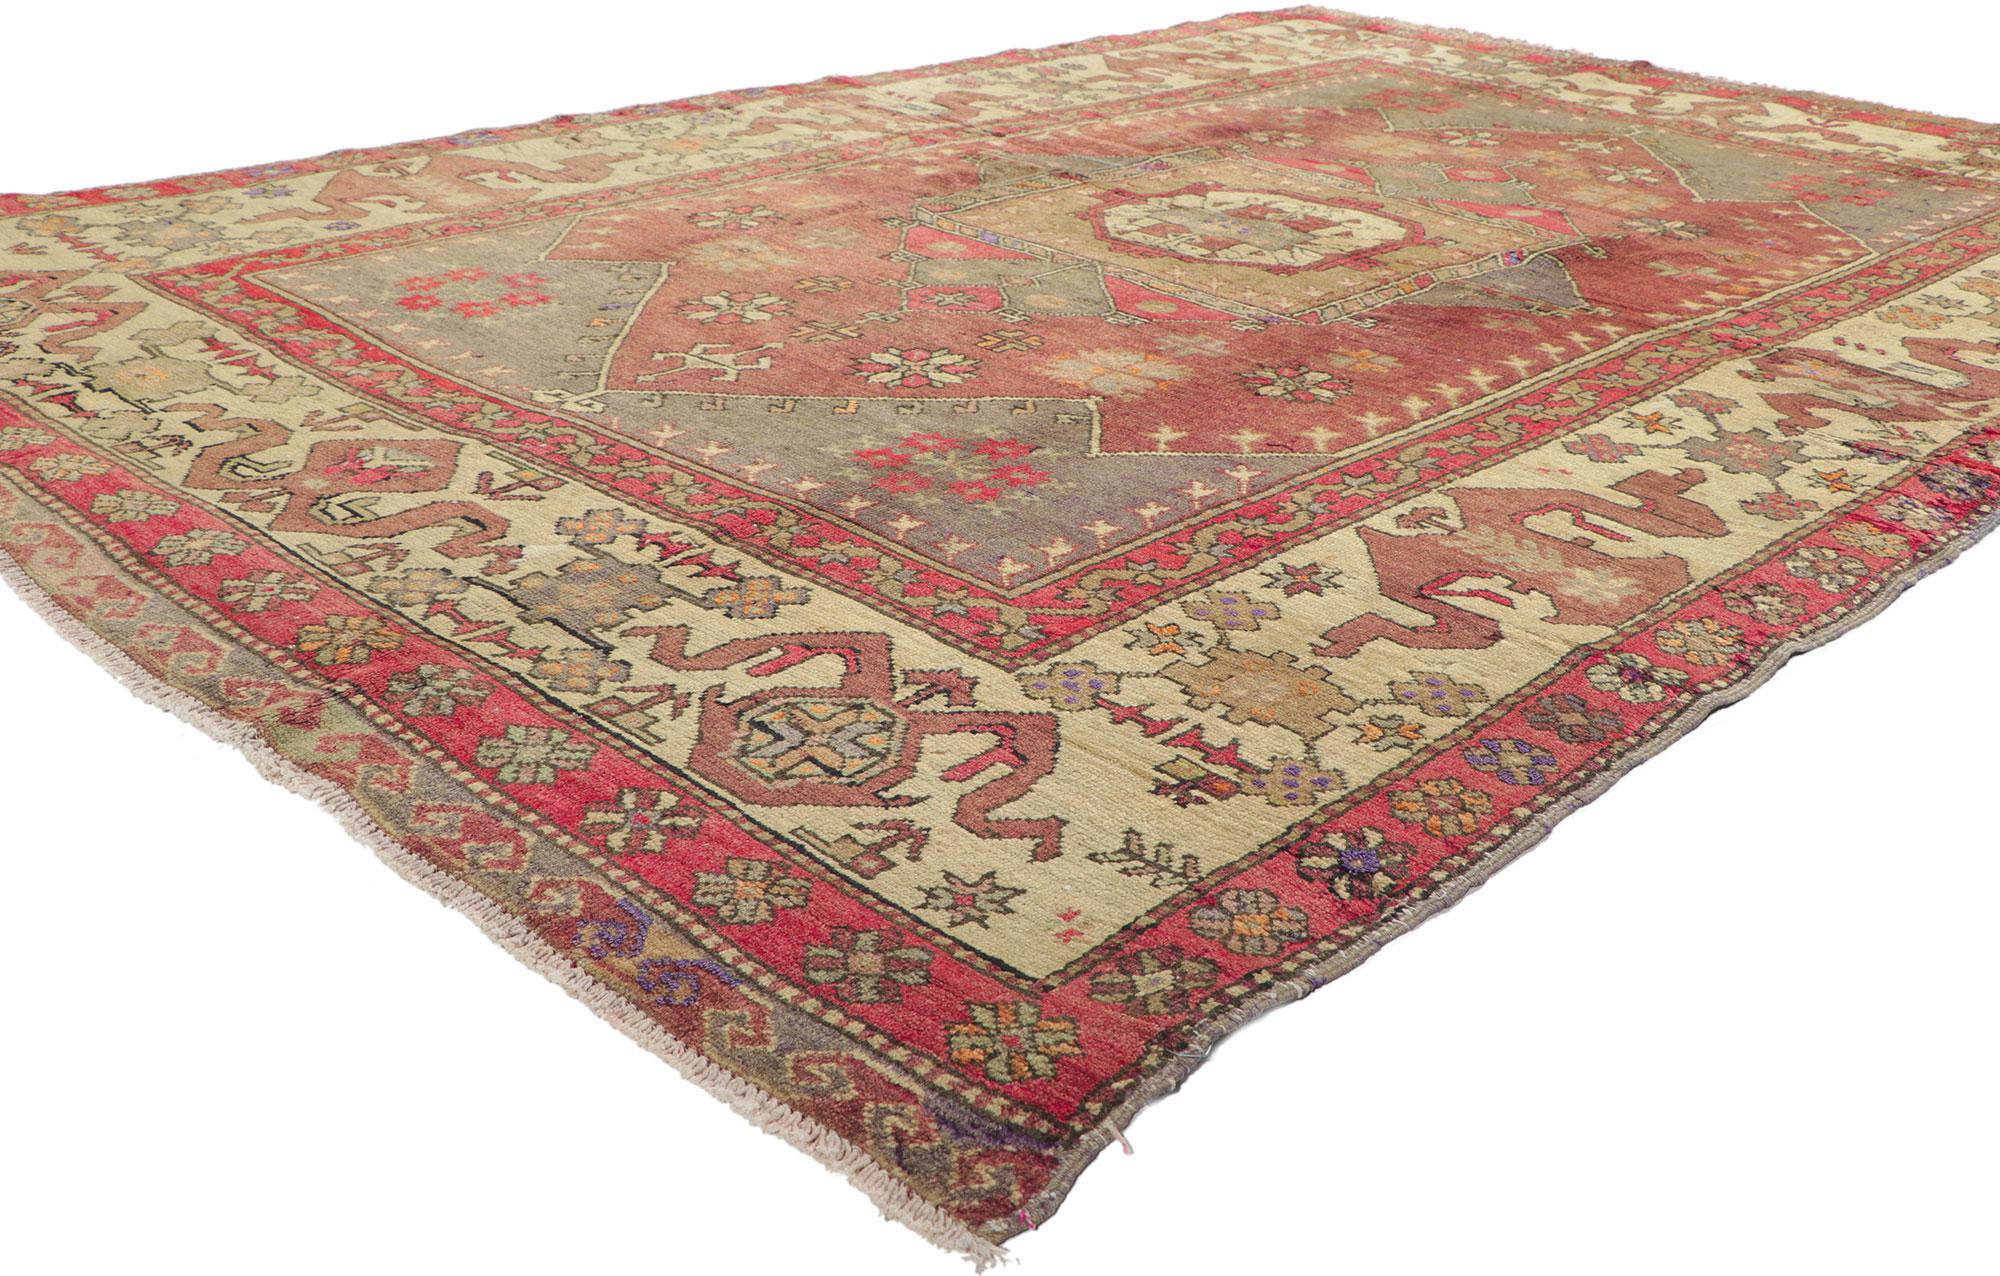 51789 Vintage Turkish oushak rug, 05'10 x 08'08.
Showcasing a bold expressive design, incredible detail and texture, this hand knitted wool vintage Turkish Oushak rug is a captivating vision of woven beauty. The eye-catching medallion design and